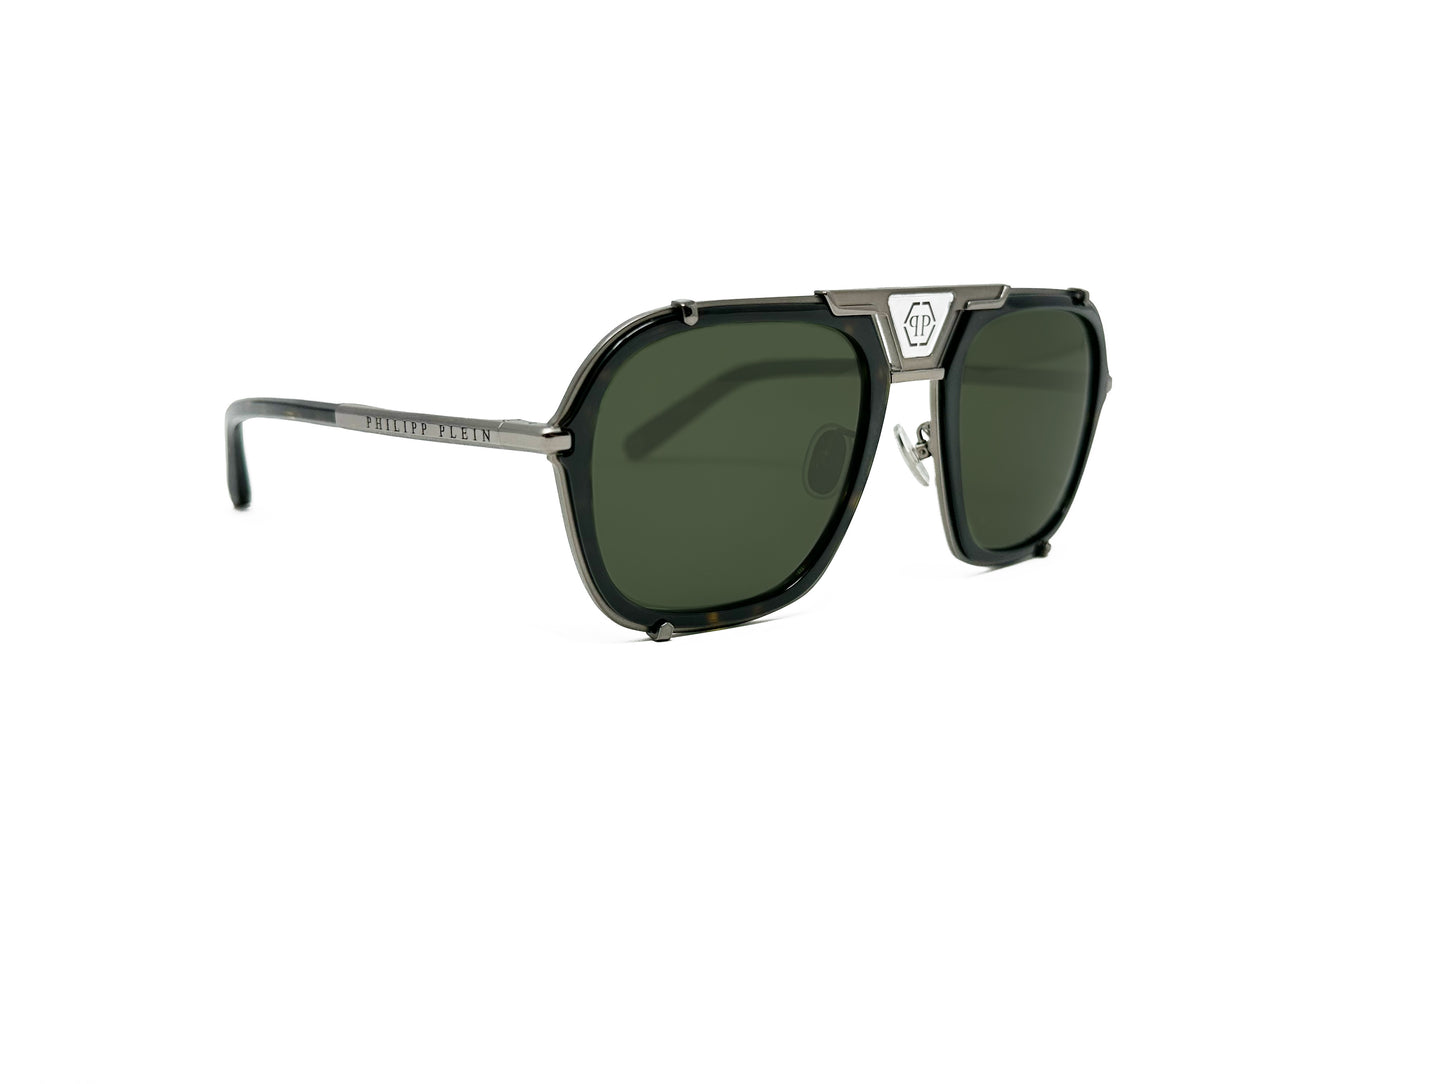 Philipp Plein squared aviator style sunglass with monogram above bridge. Model: SPP010 Signature. Color: 584Y Tortoise with silver metal temples. Side view.